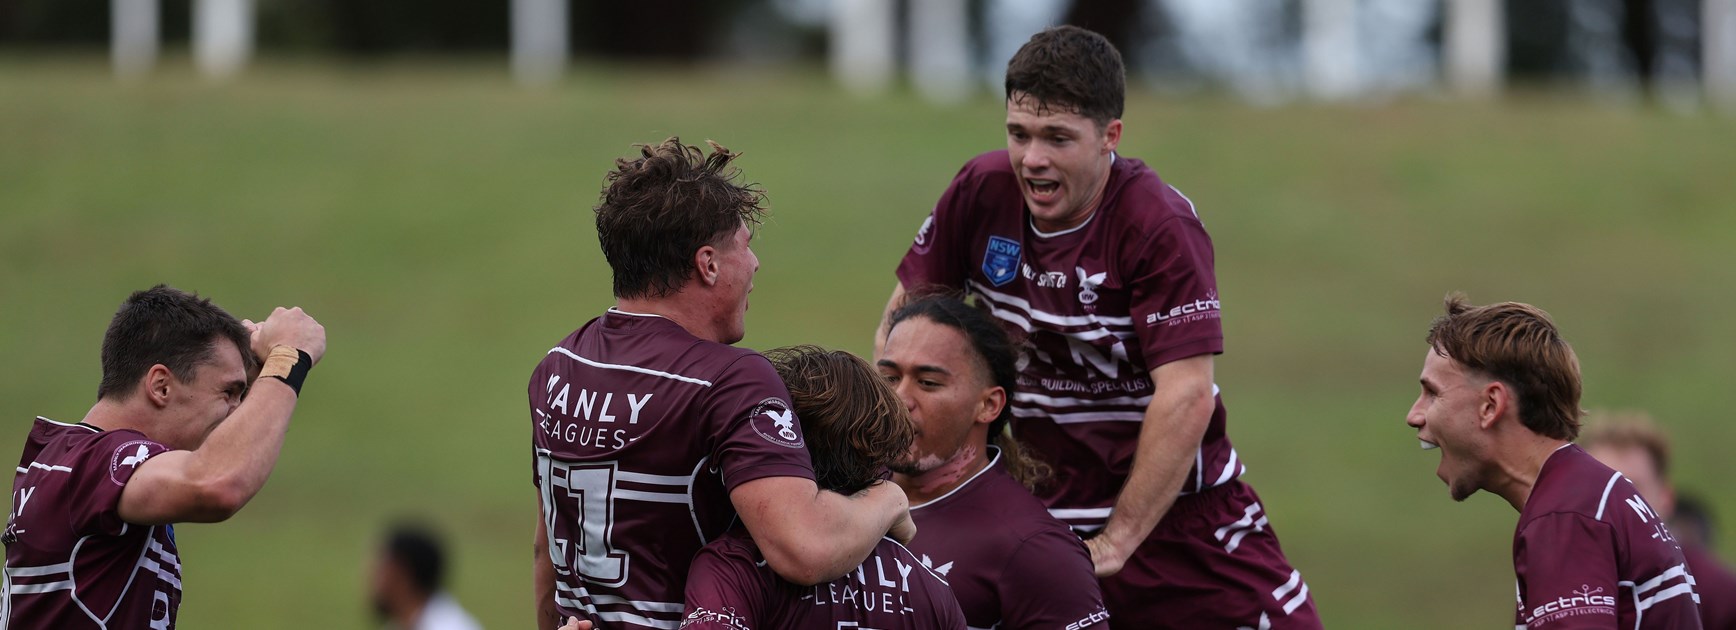 Local juniors fly high in win over Sydney Shield leaders